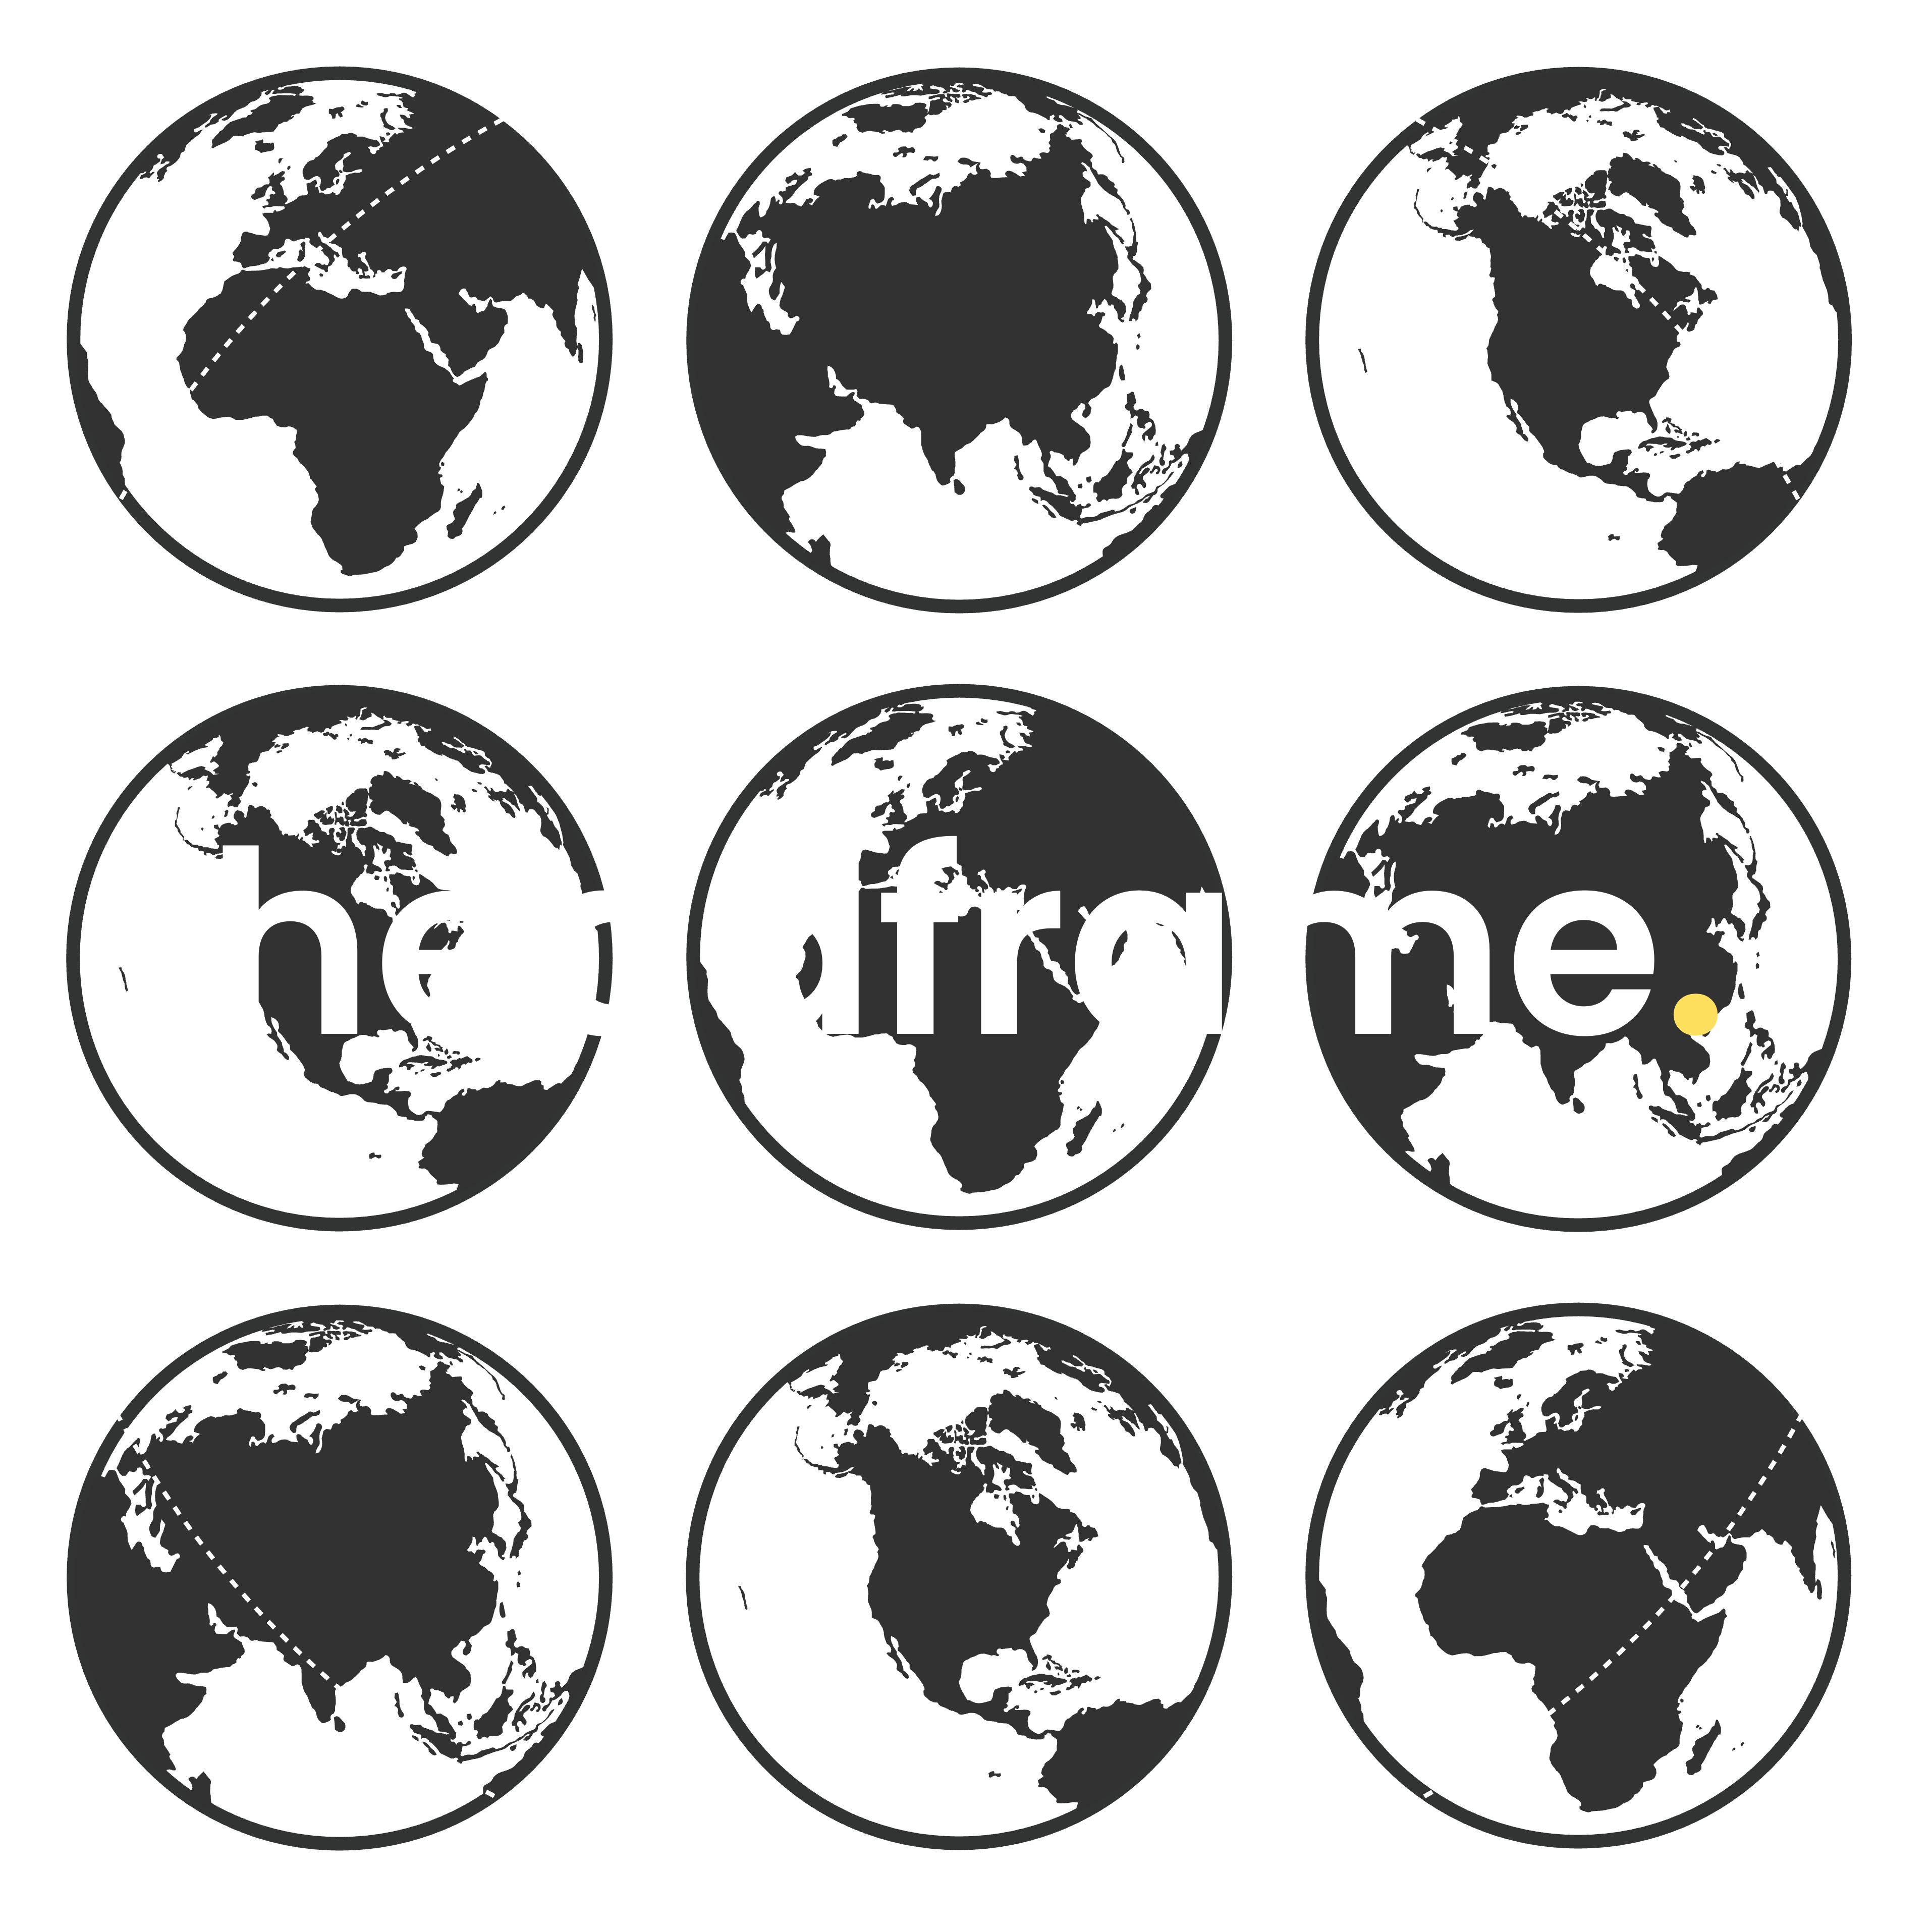 Headframe logo on top of the 9 different globe sides